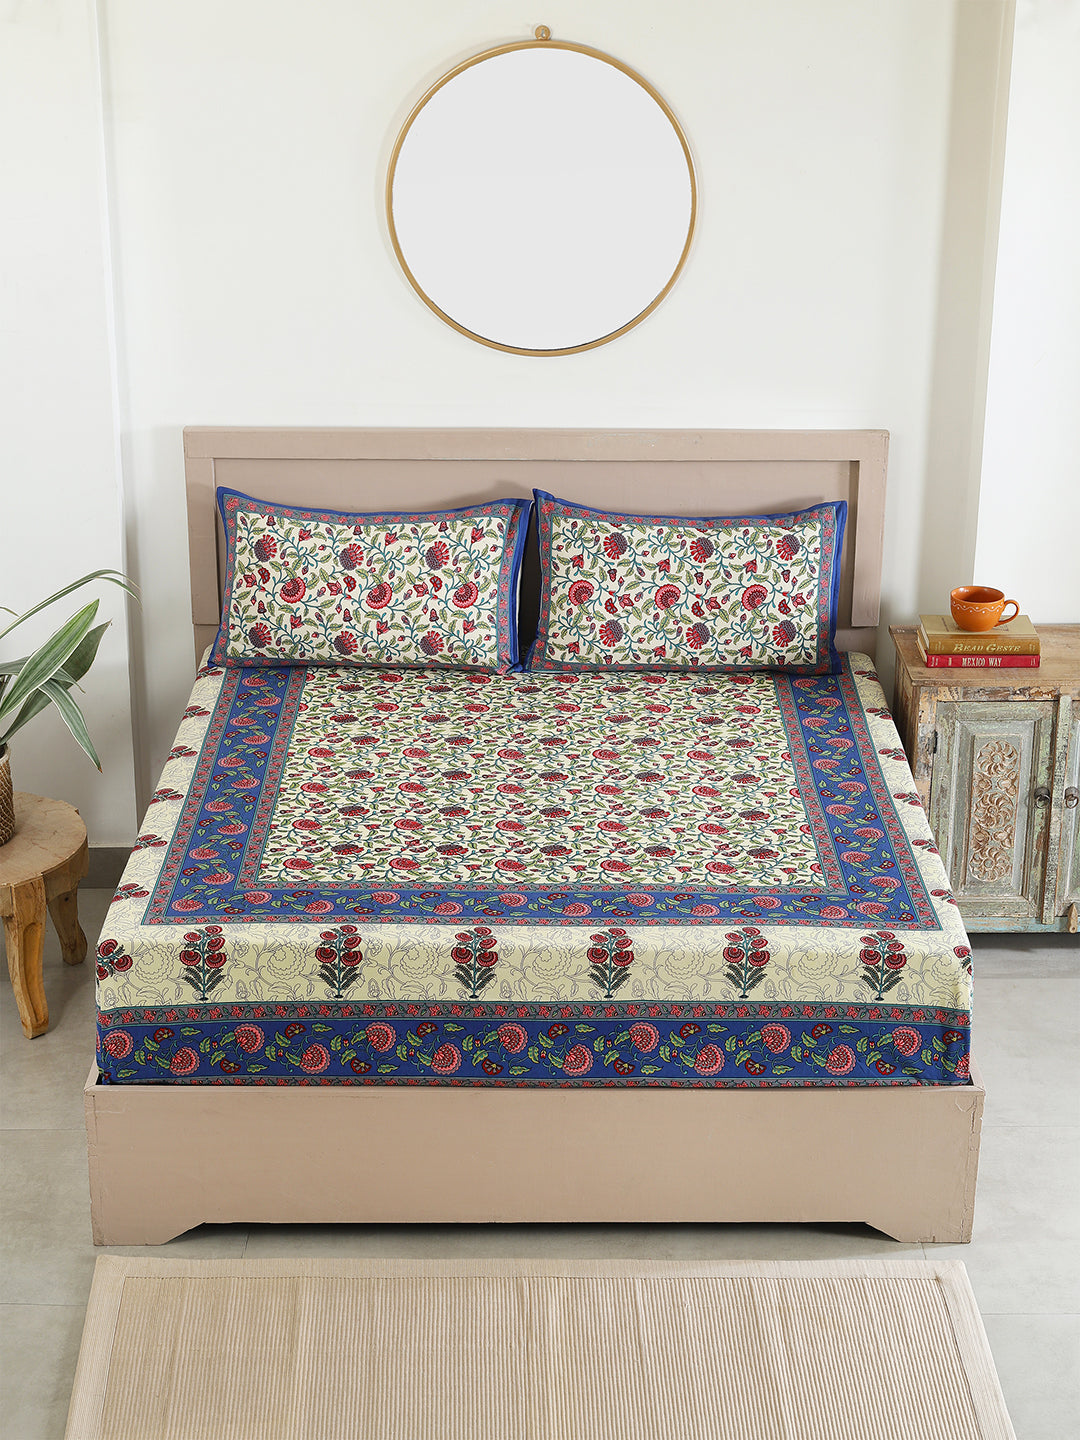 Blue Cotton Floral Printed Bedsheets For Double Bed Queen Size